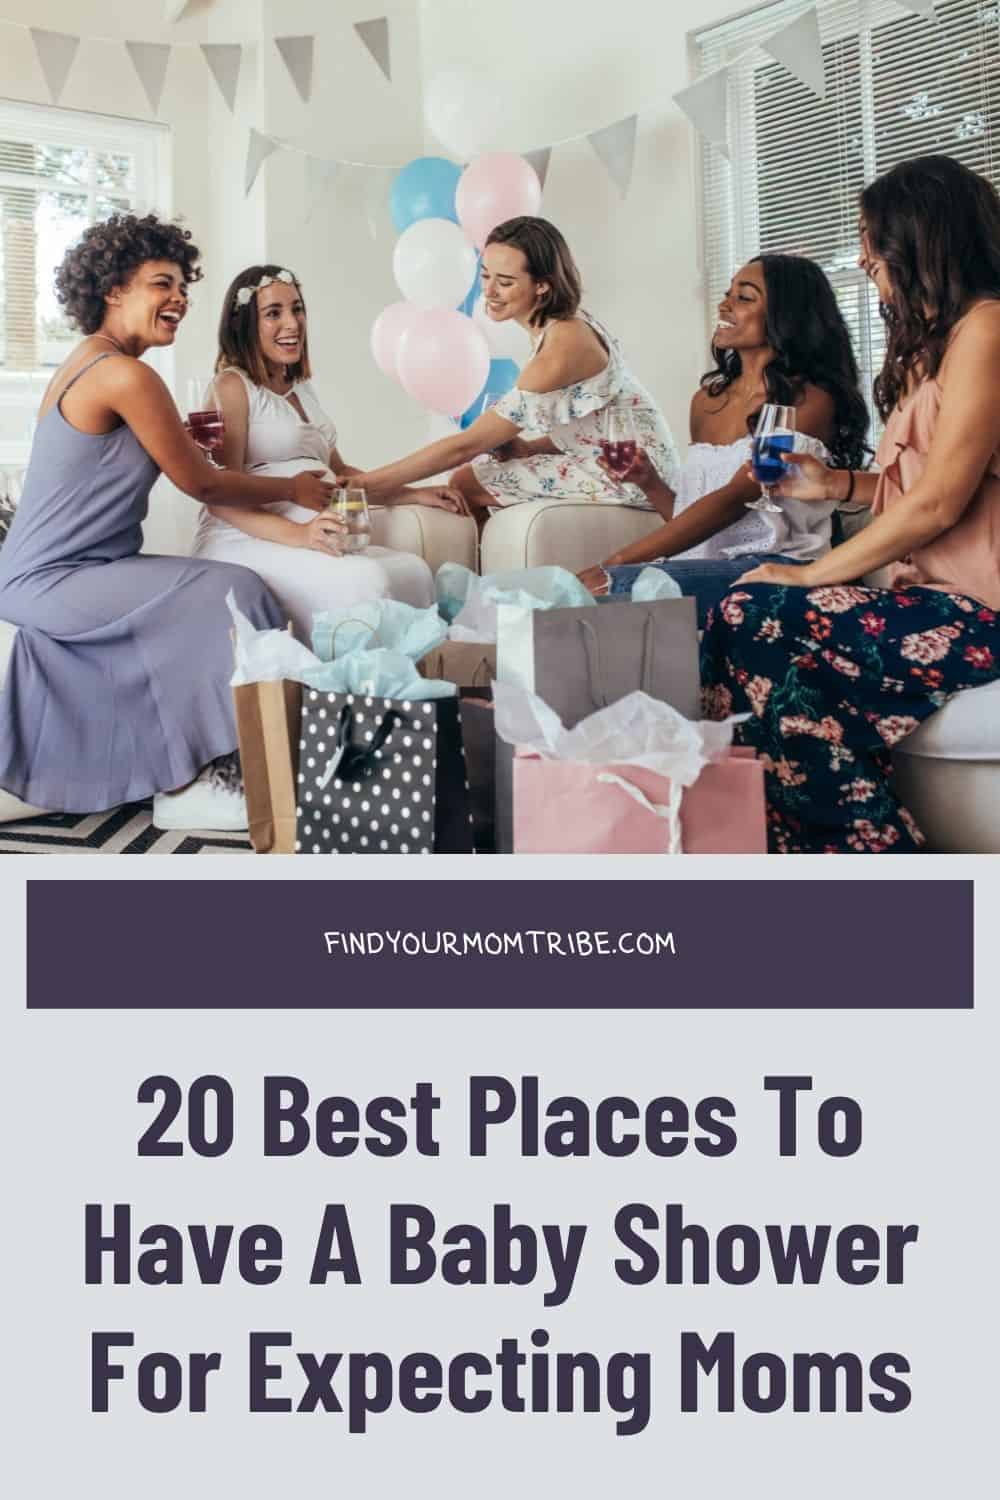 Pinterest places to have a baby shower 